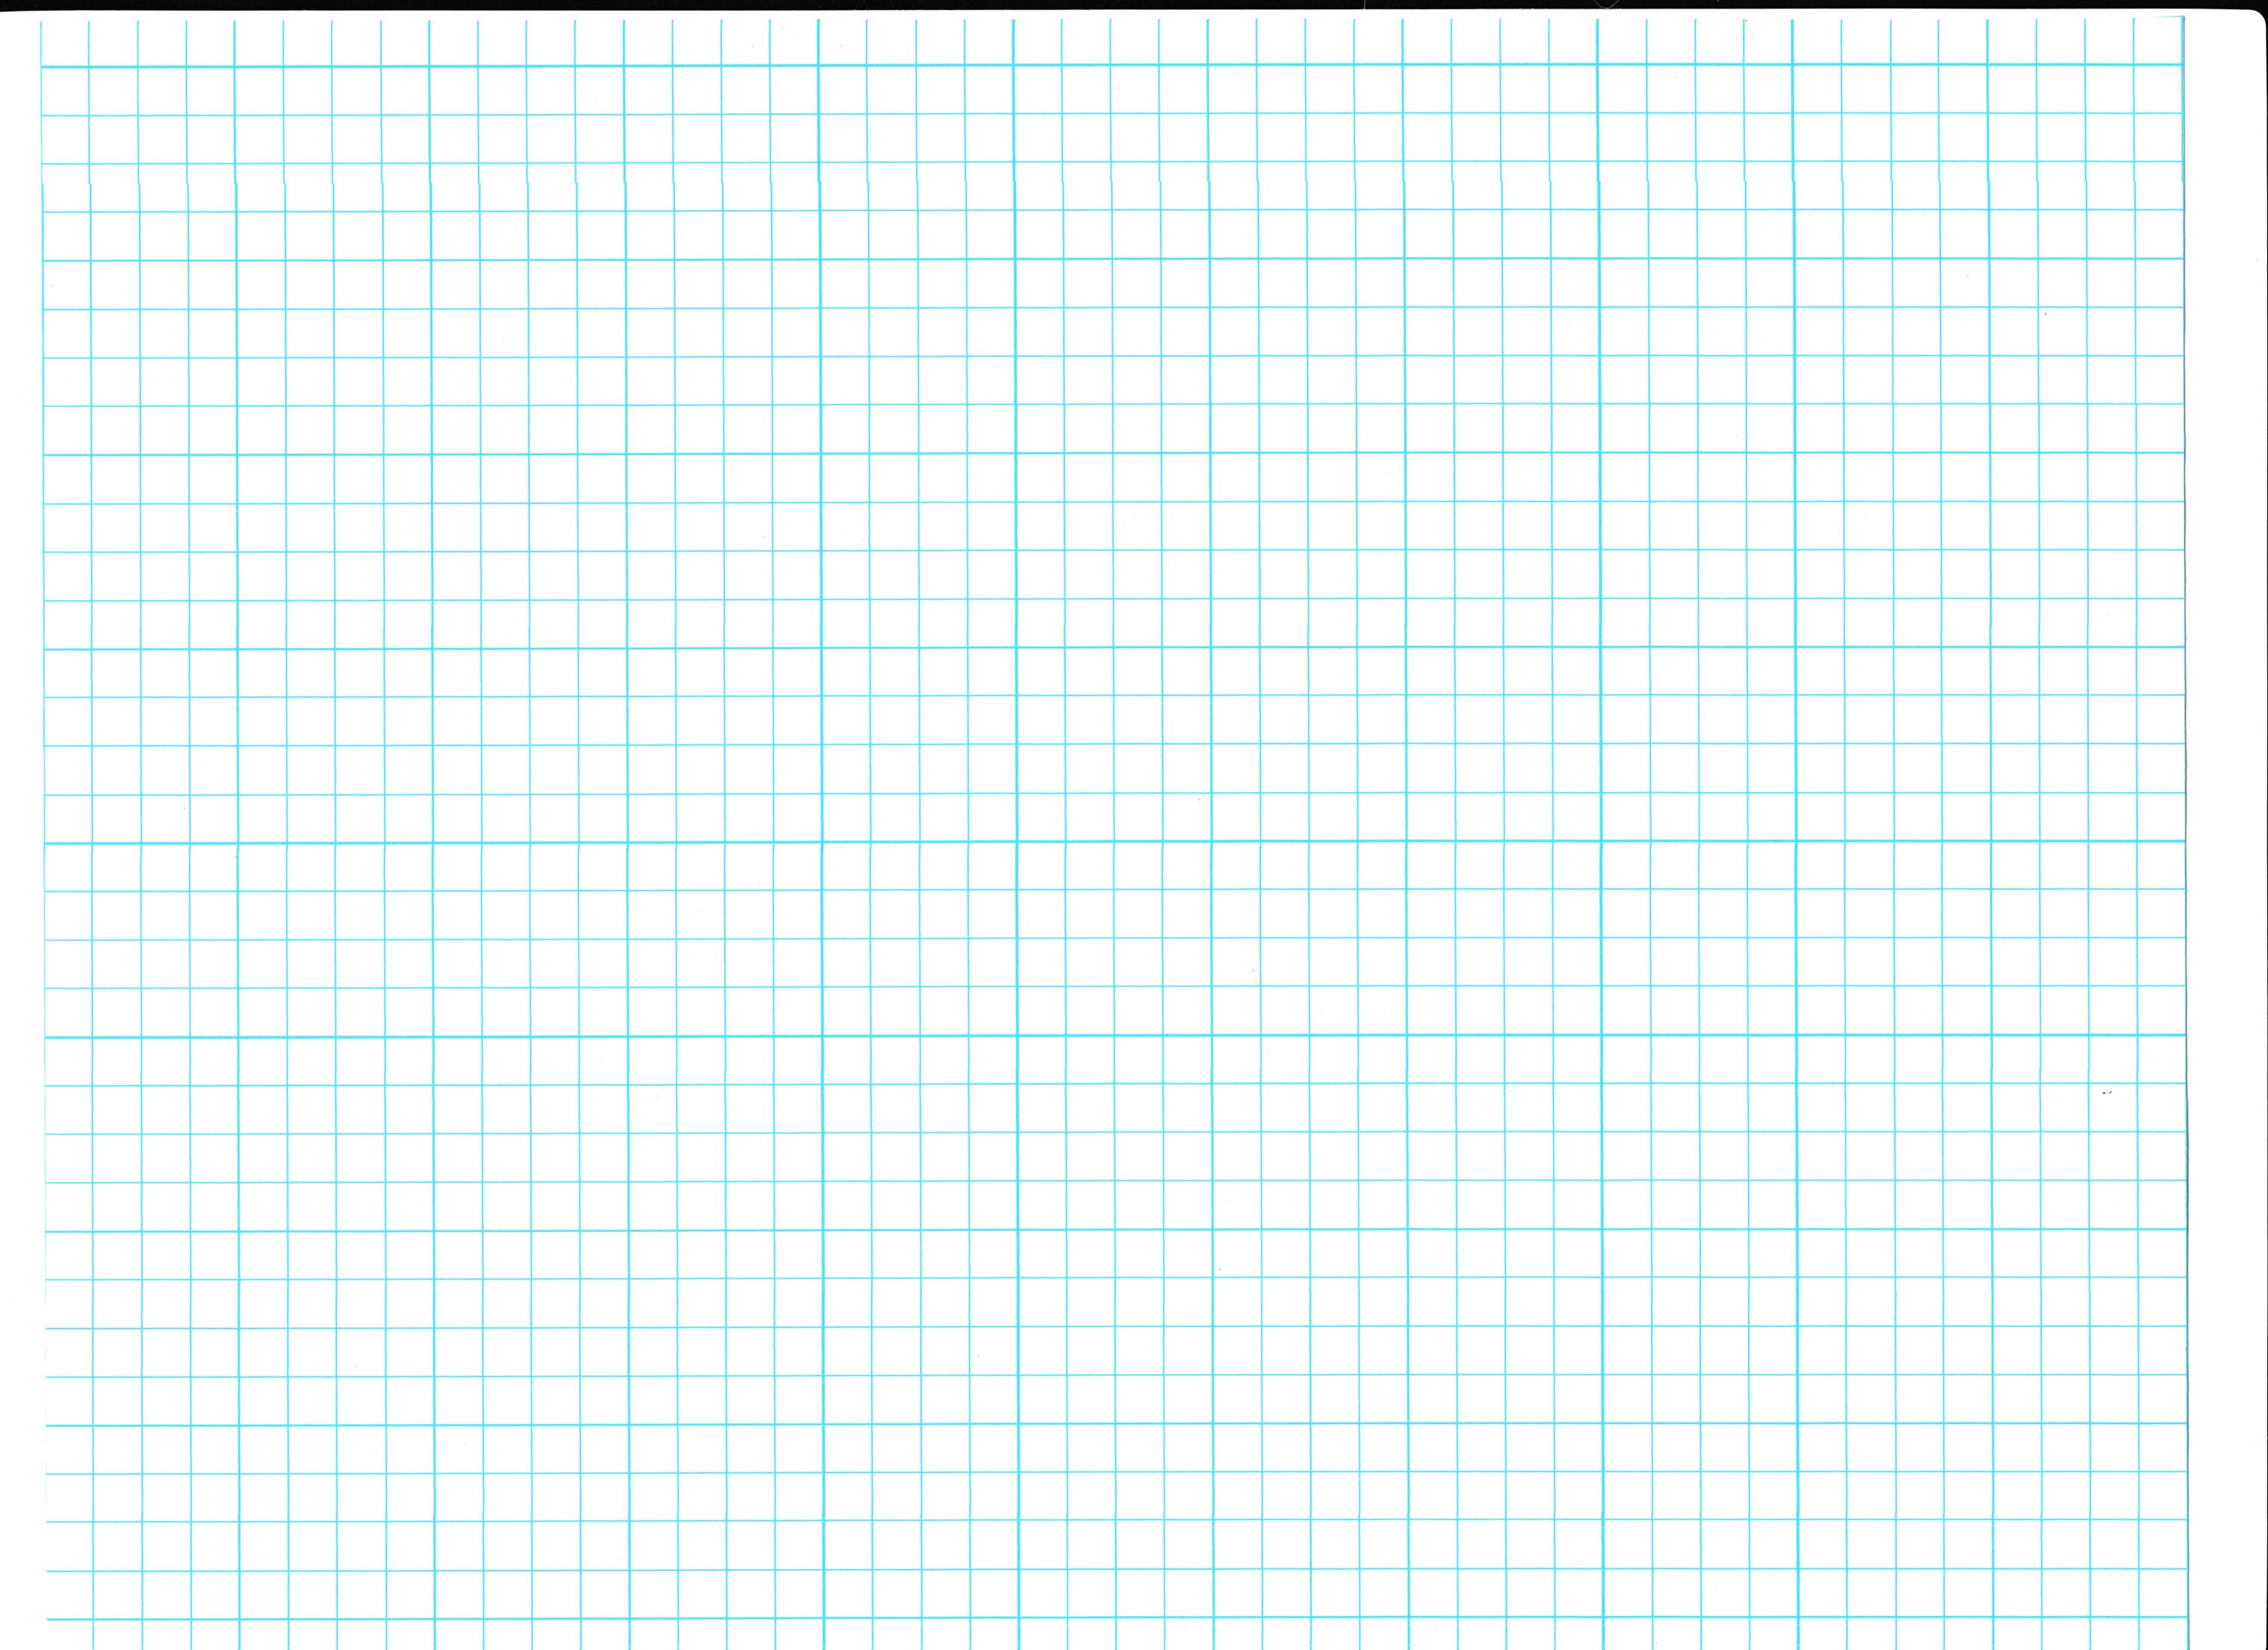 JJH Planners - Laminated - 24 x 36 - Large Graph Paper 1 and 1/4 Ruled  (GP4-24x36)